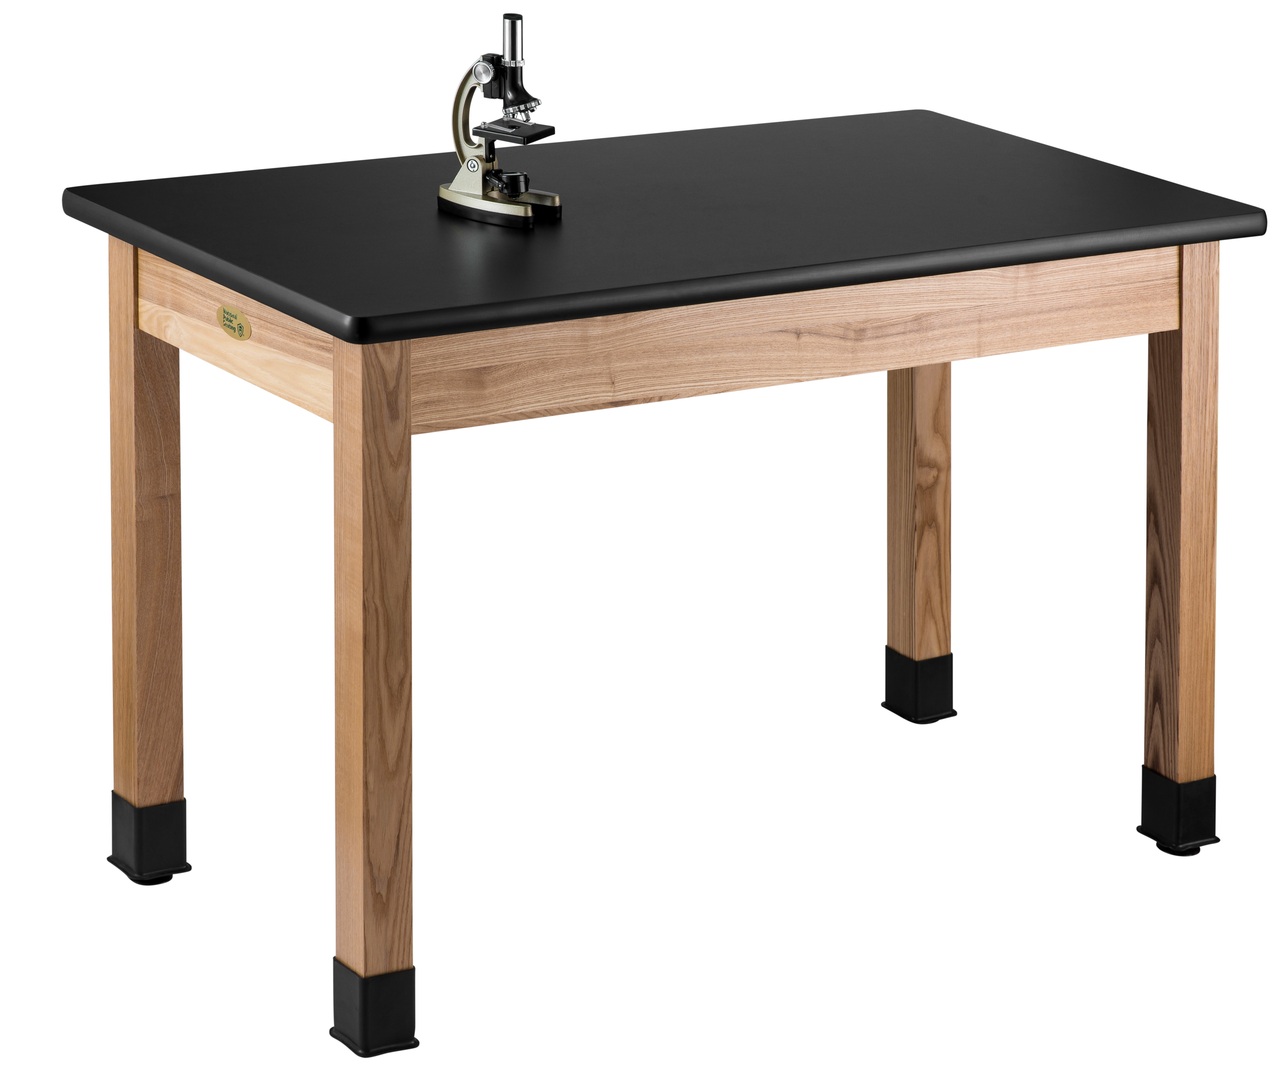 NPS Wood Science Lab Table -  24"x54"x36" -  HPL Top - Black Top and Ash Leg